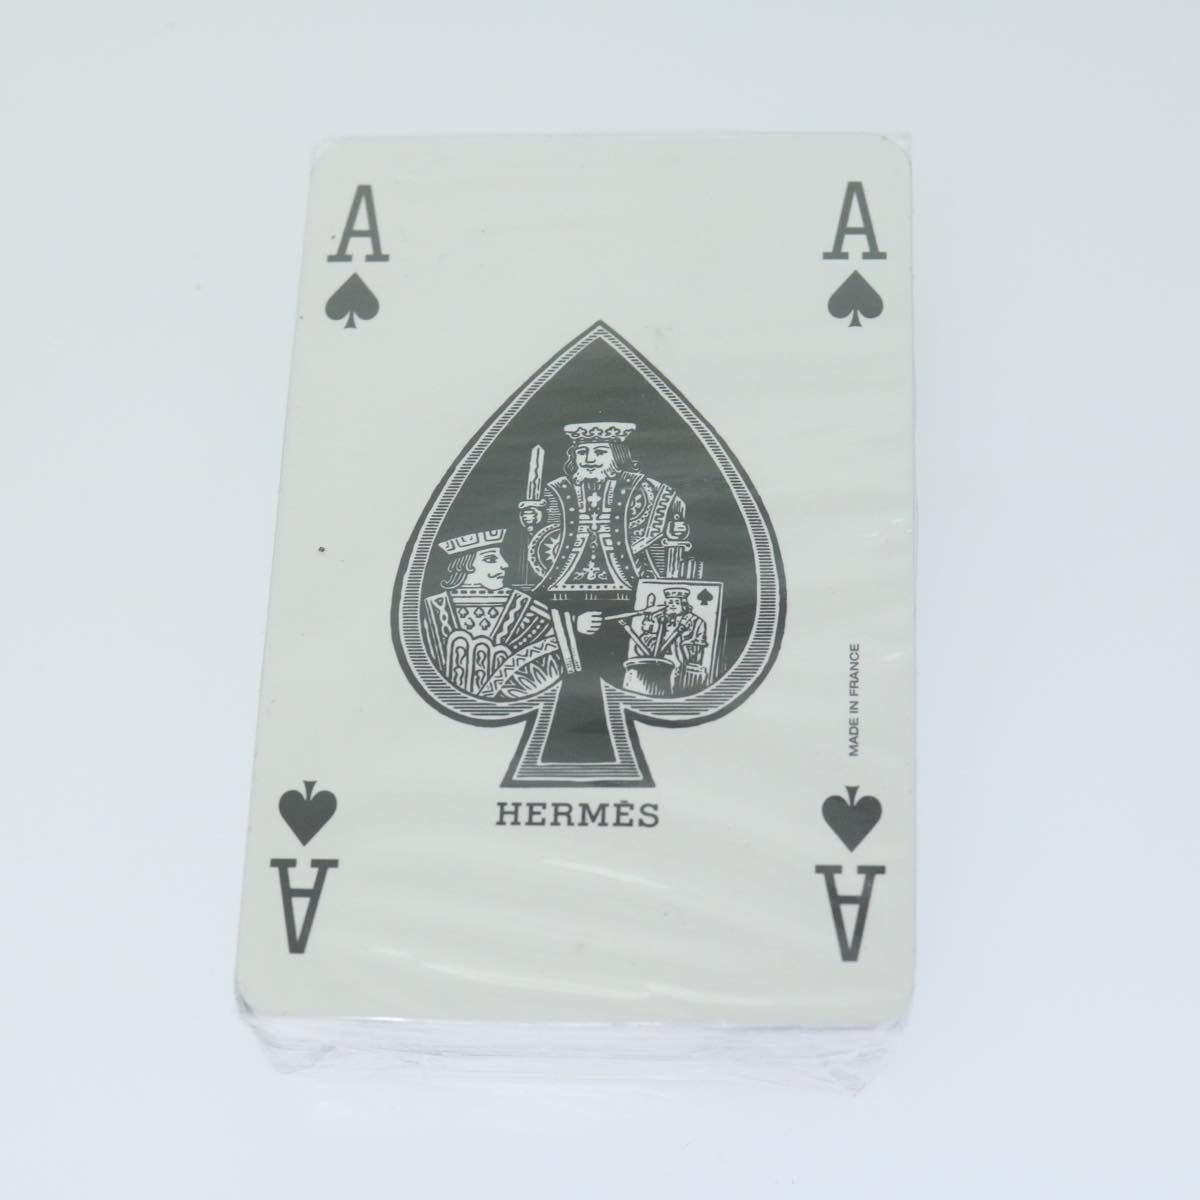 HERMES Playing Cards Multicolor Auth 64622